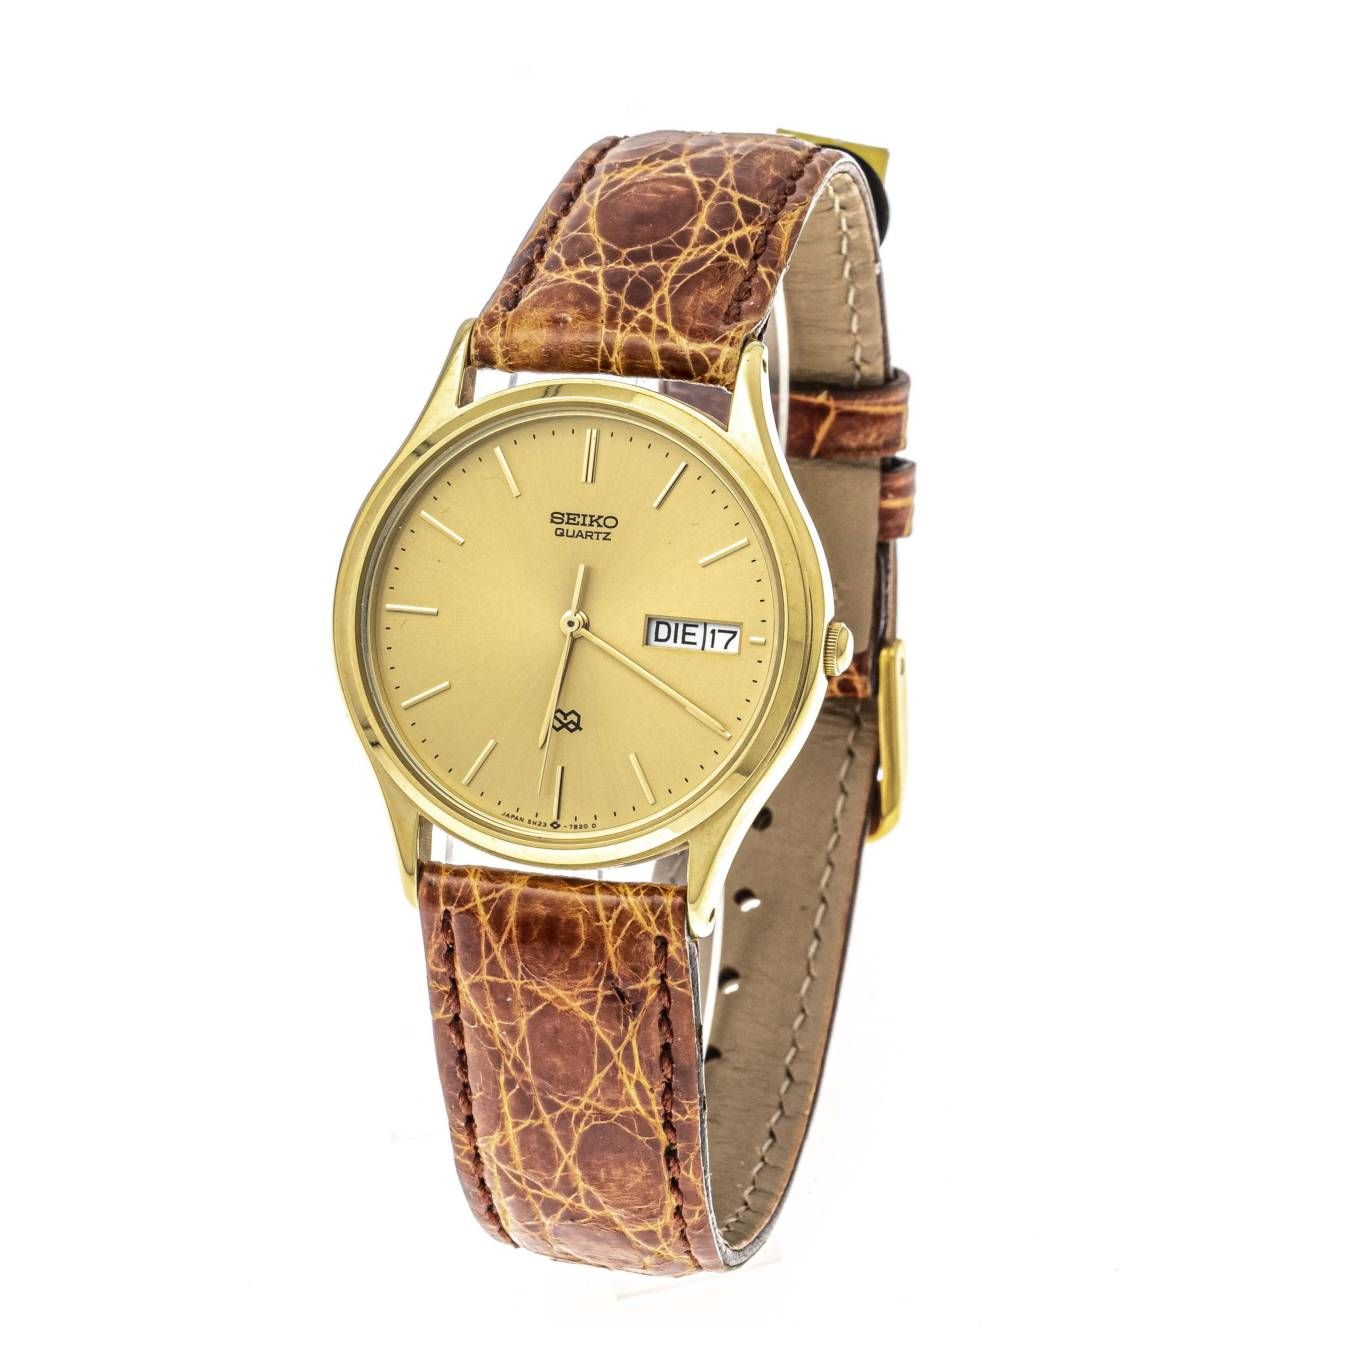 Seiko men's quartz watch Day Date, Ref. 5H23-7B00, movement running, gold  plated, screwed case back, mineral crystal, gold dial with gold plated bar  indexes, day of the week and date at 3